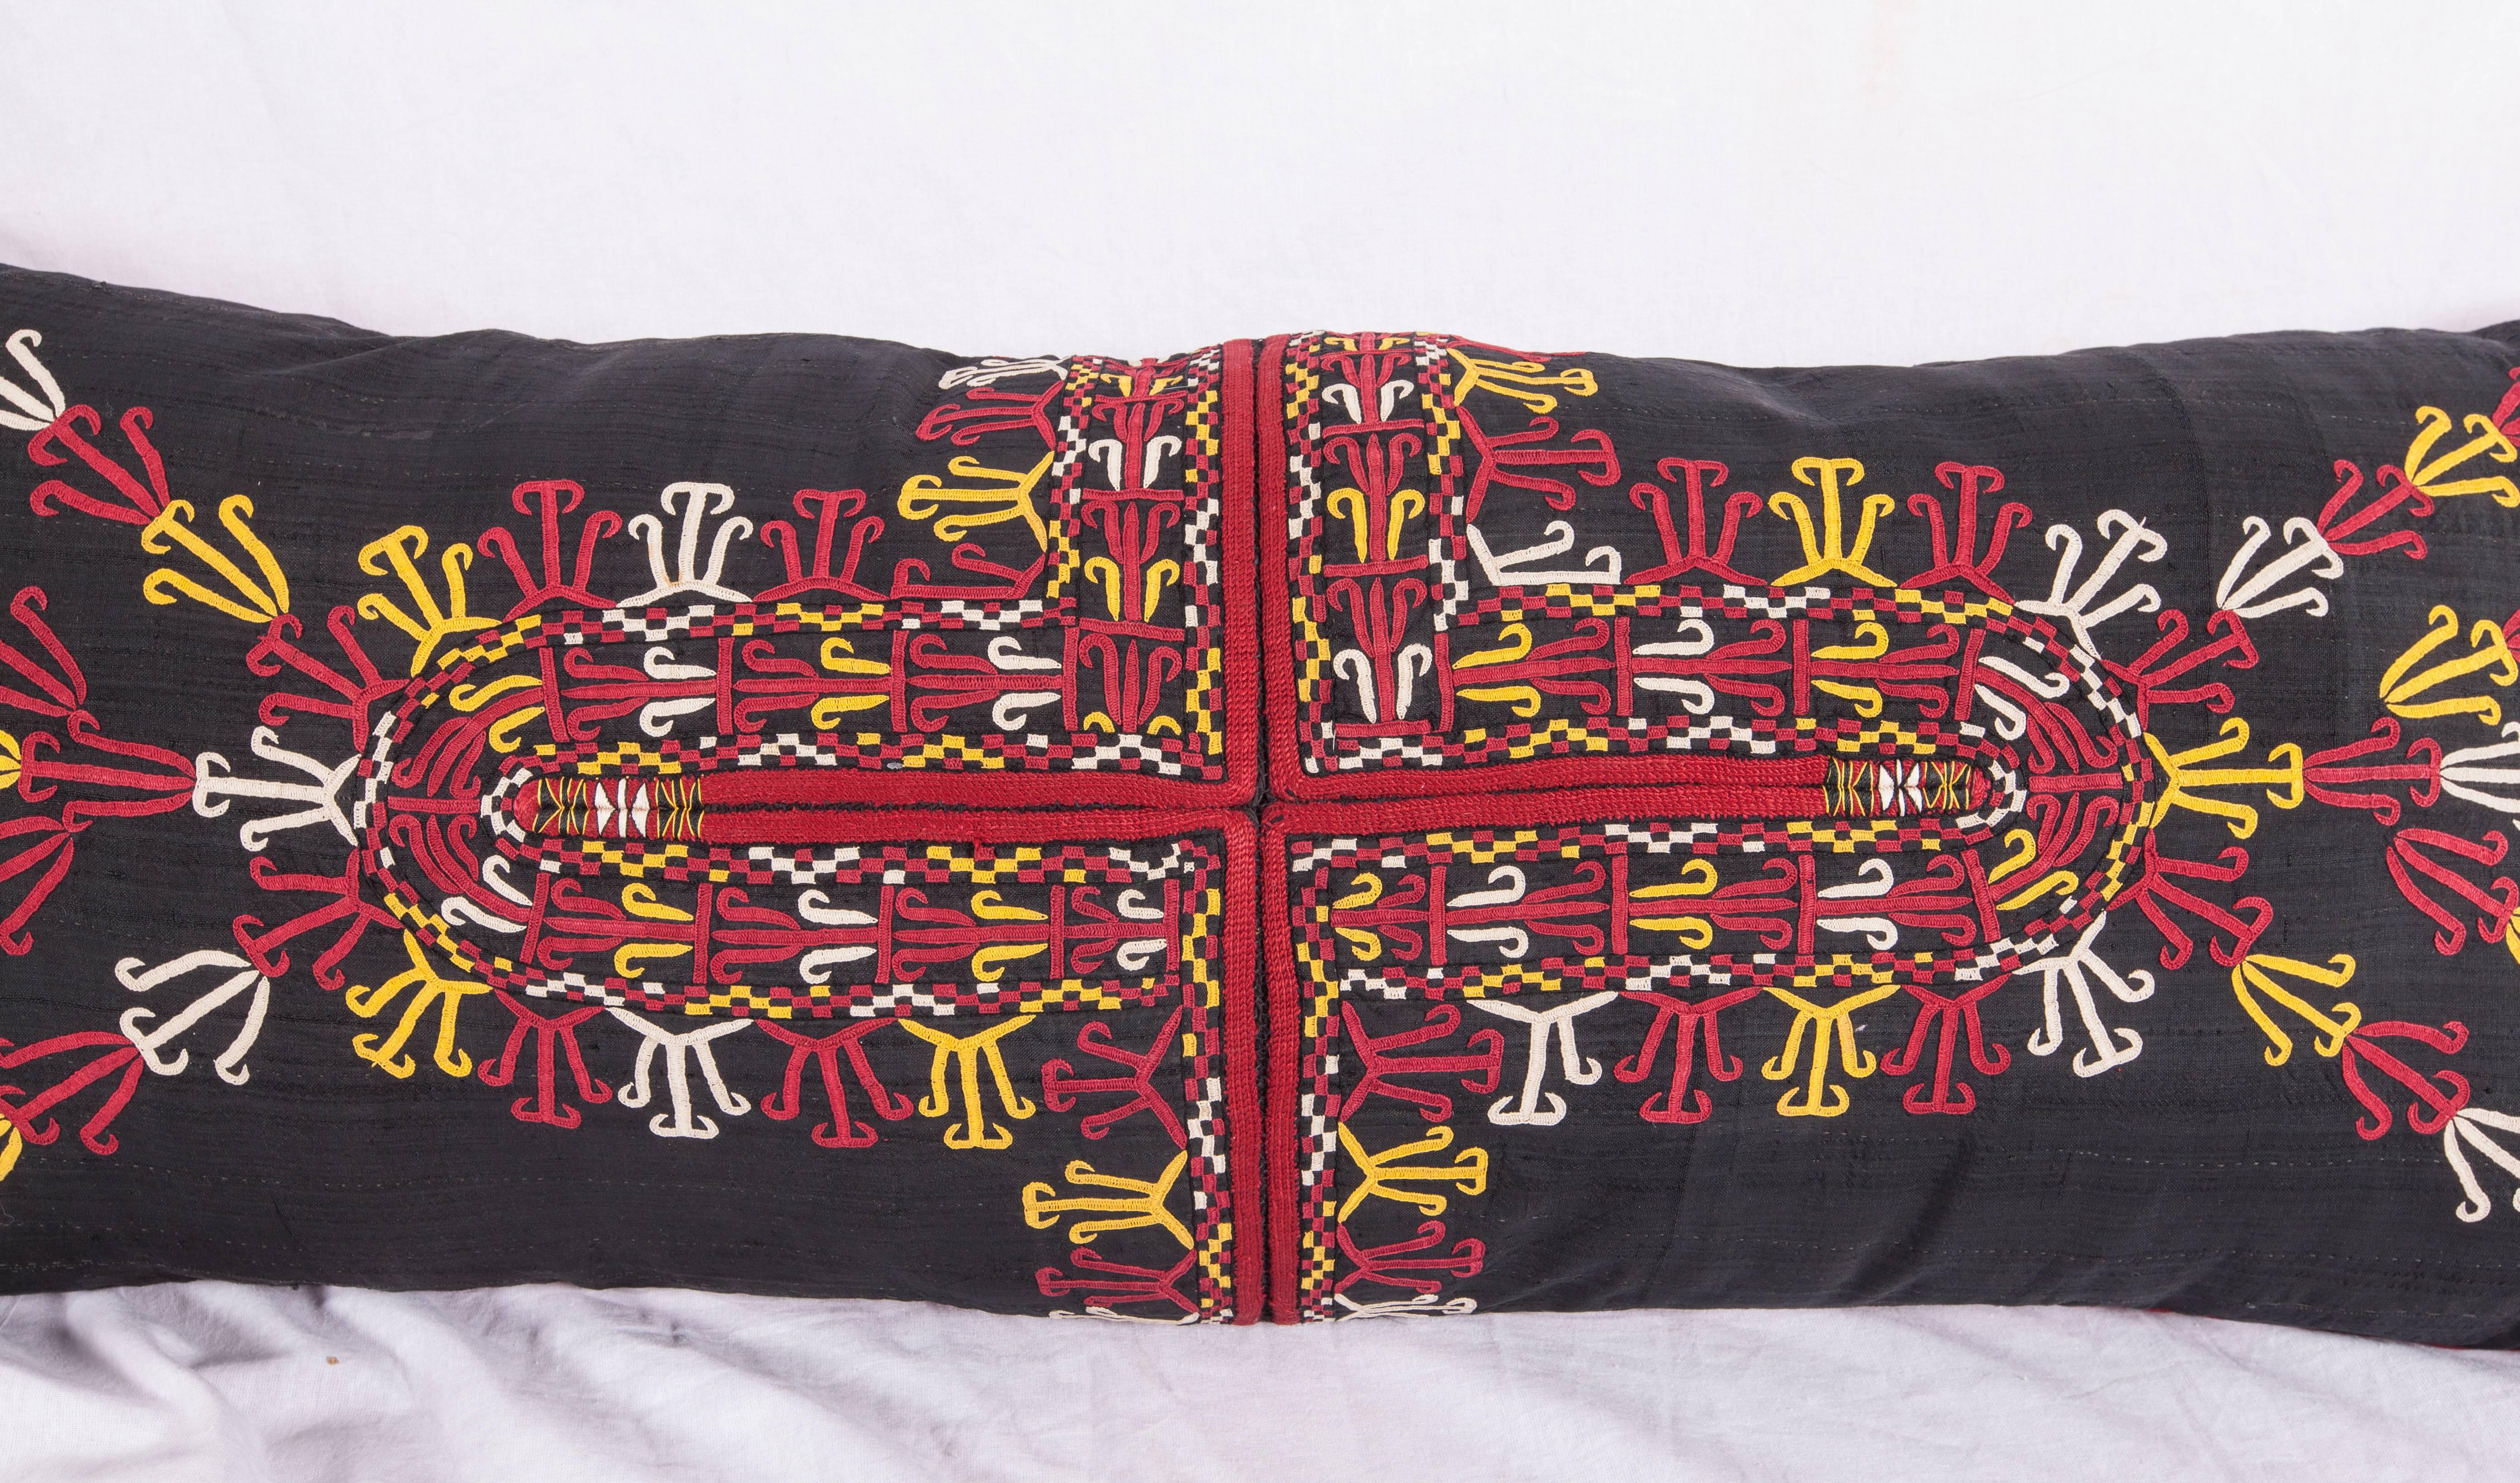 a lovely pillow with very fine silk embroidery fashioned from a Central Asian Turkmen Tekke Tribe coat.
Backing is cotton and it comes with a bag to accomodate insert material.
Please note , no insert is provided.
Dry Clean Only
since the item